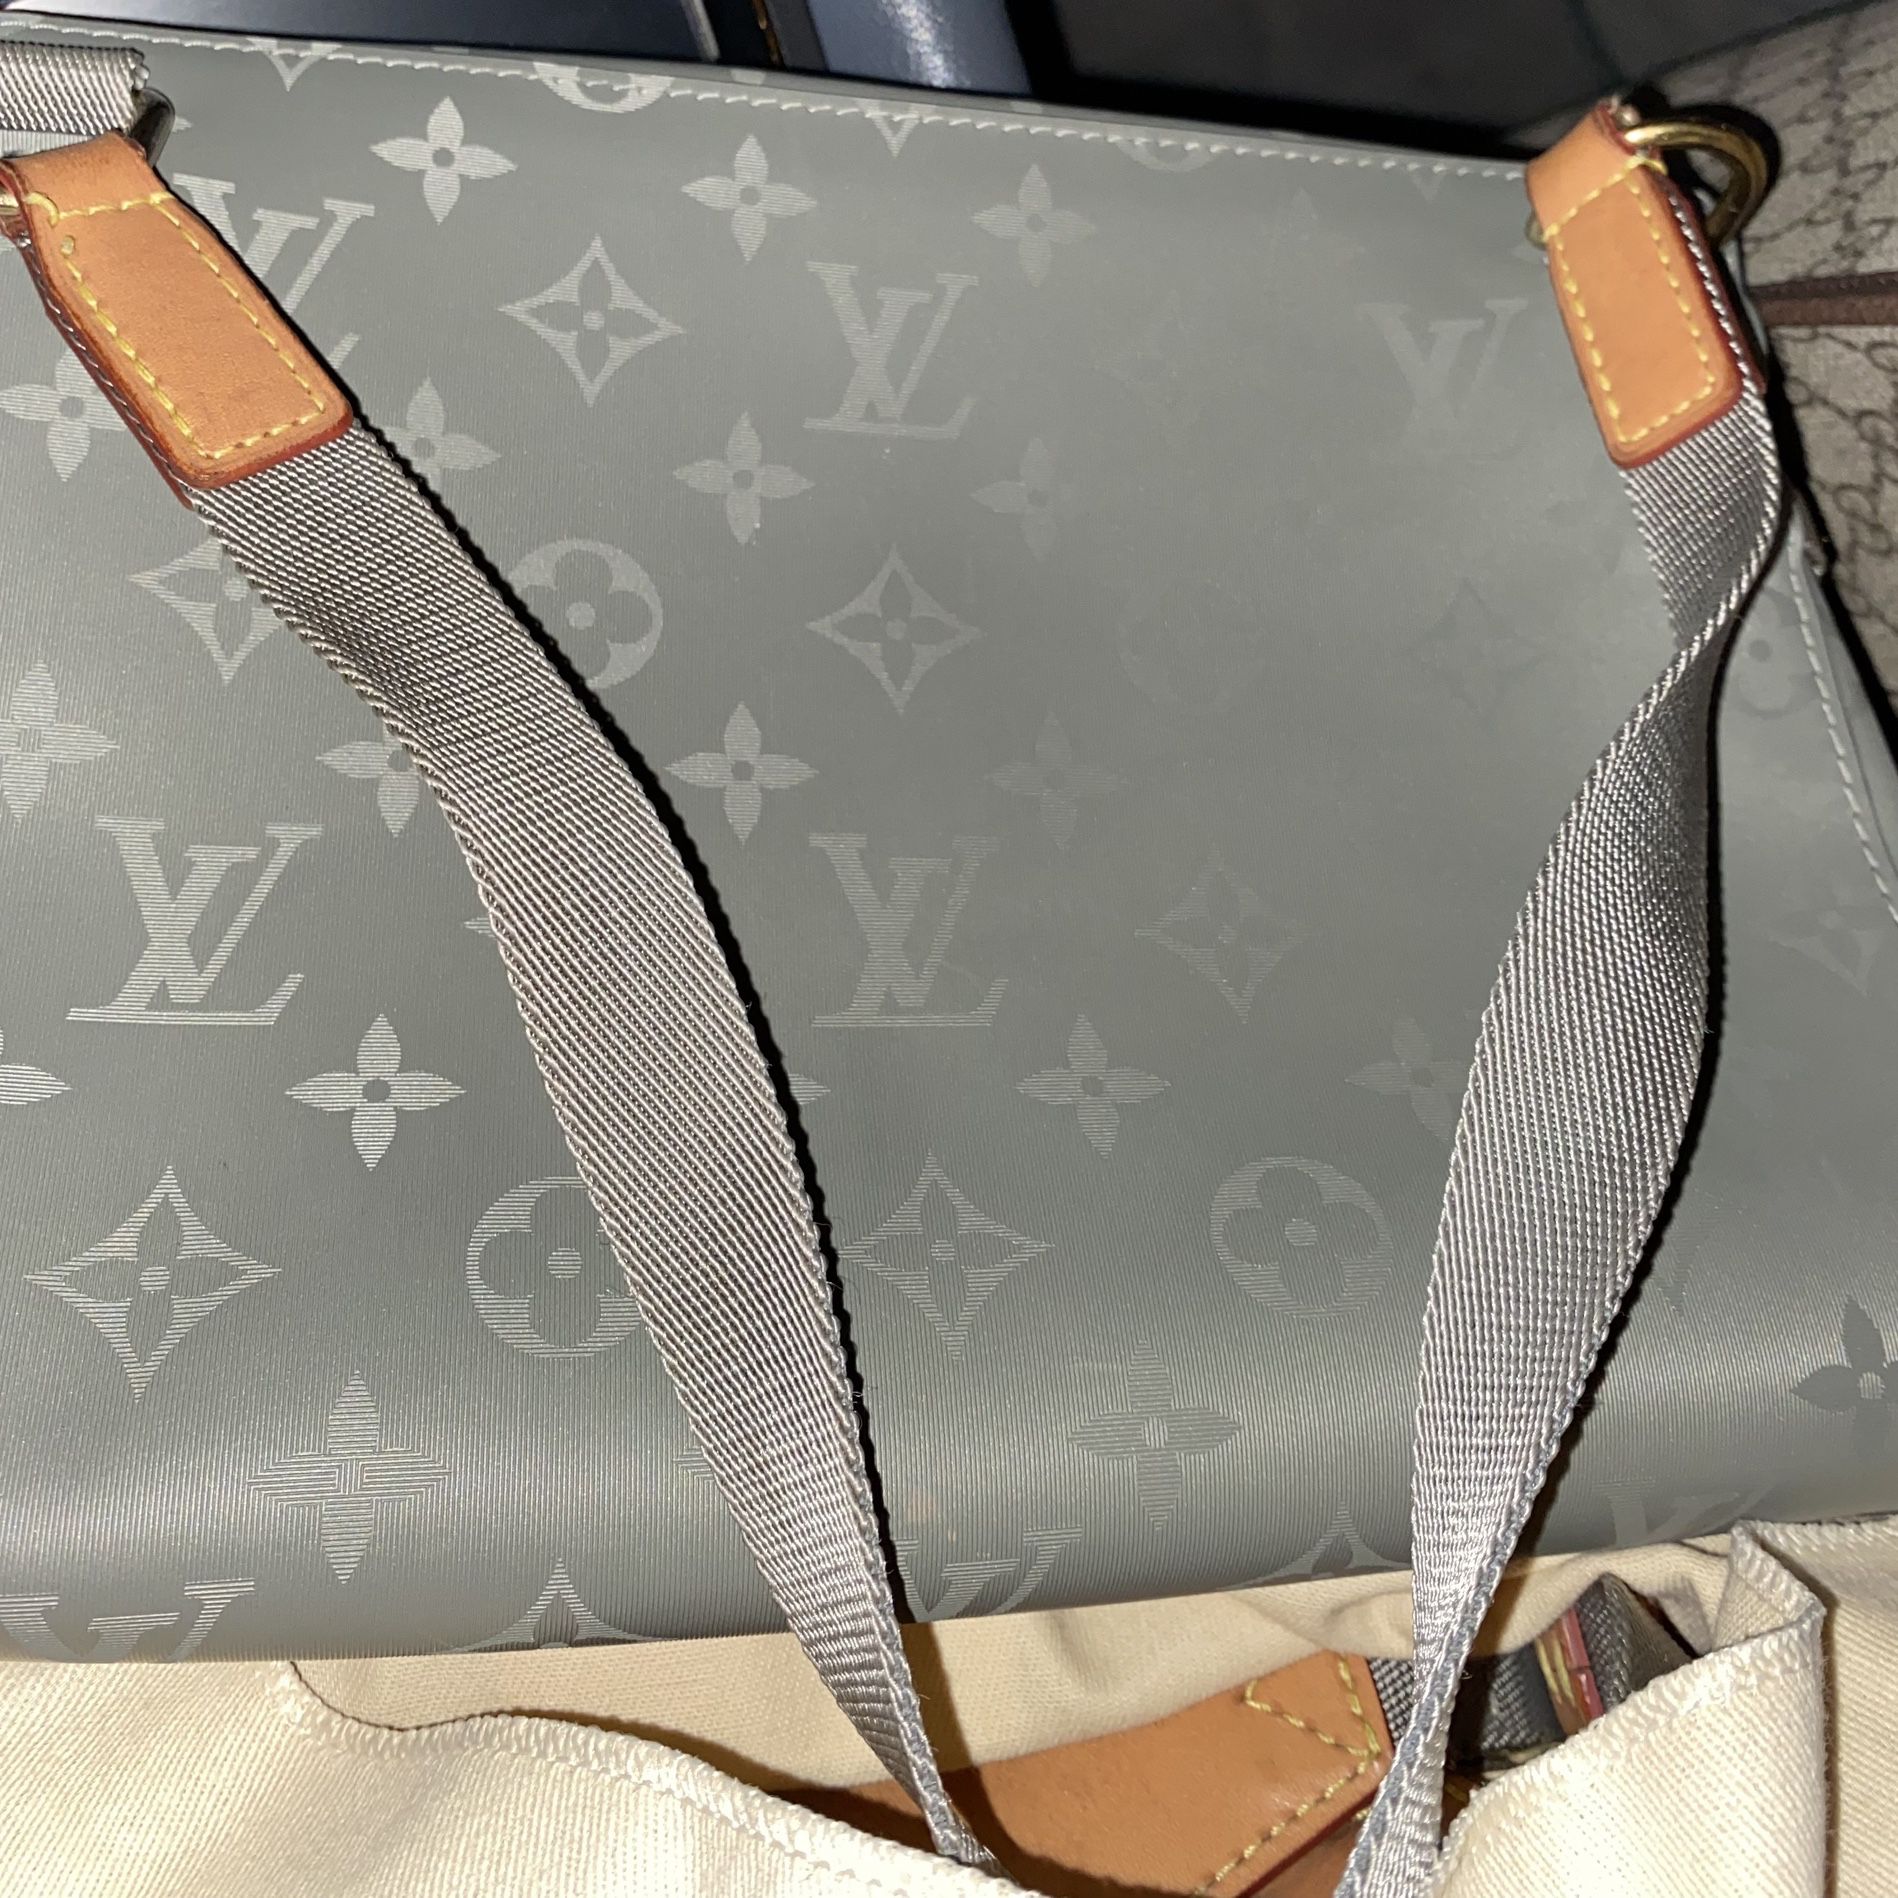 Louis Vuitton Face Mask for Sale in Diamond Bar, CA - OfferUp